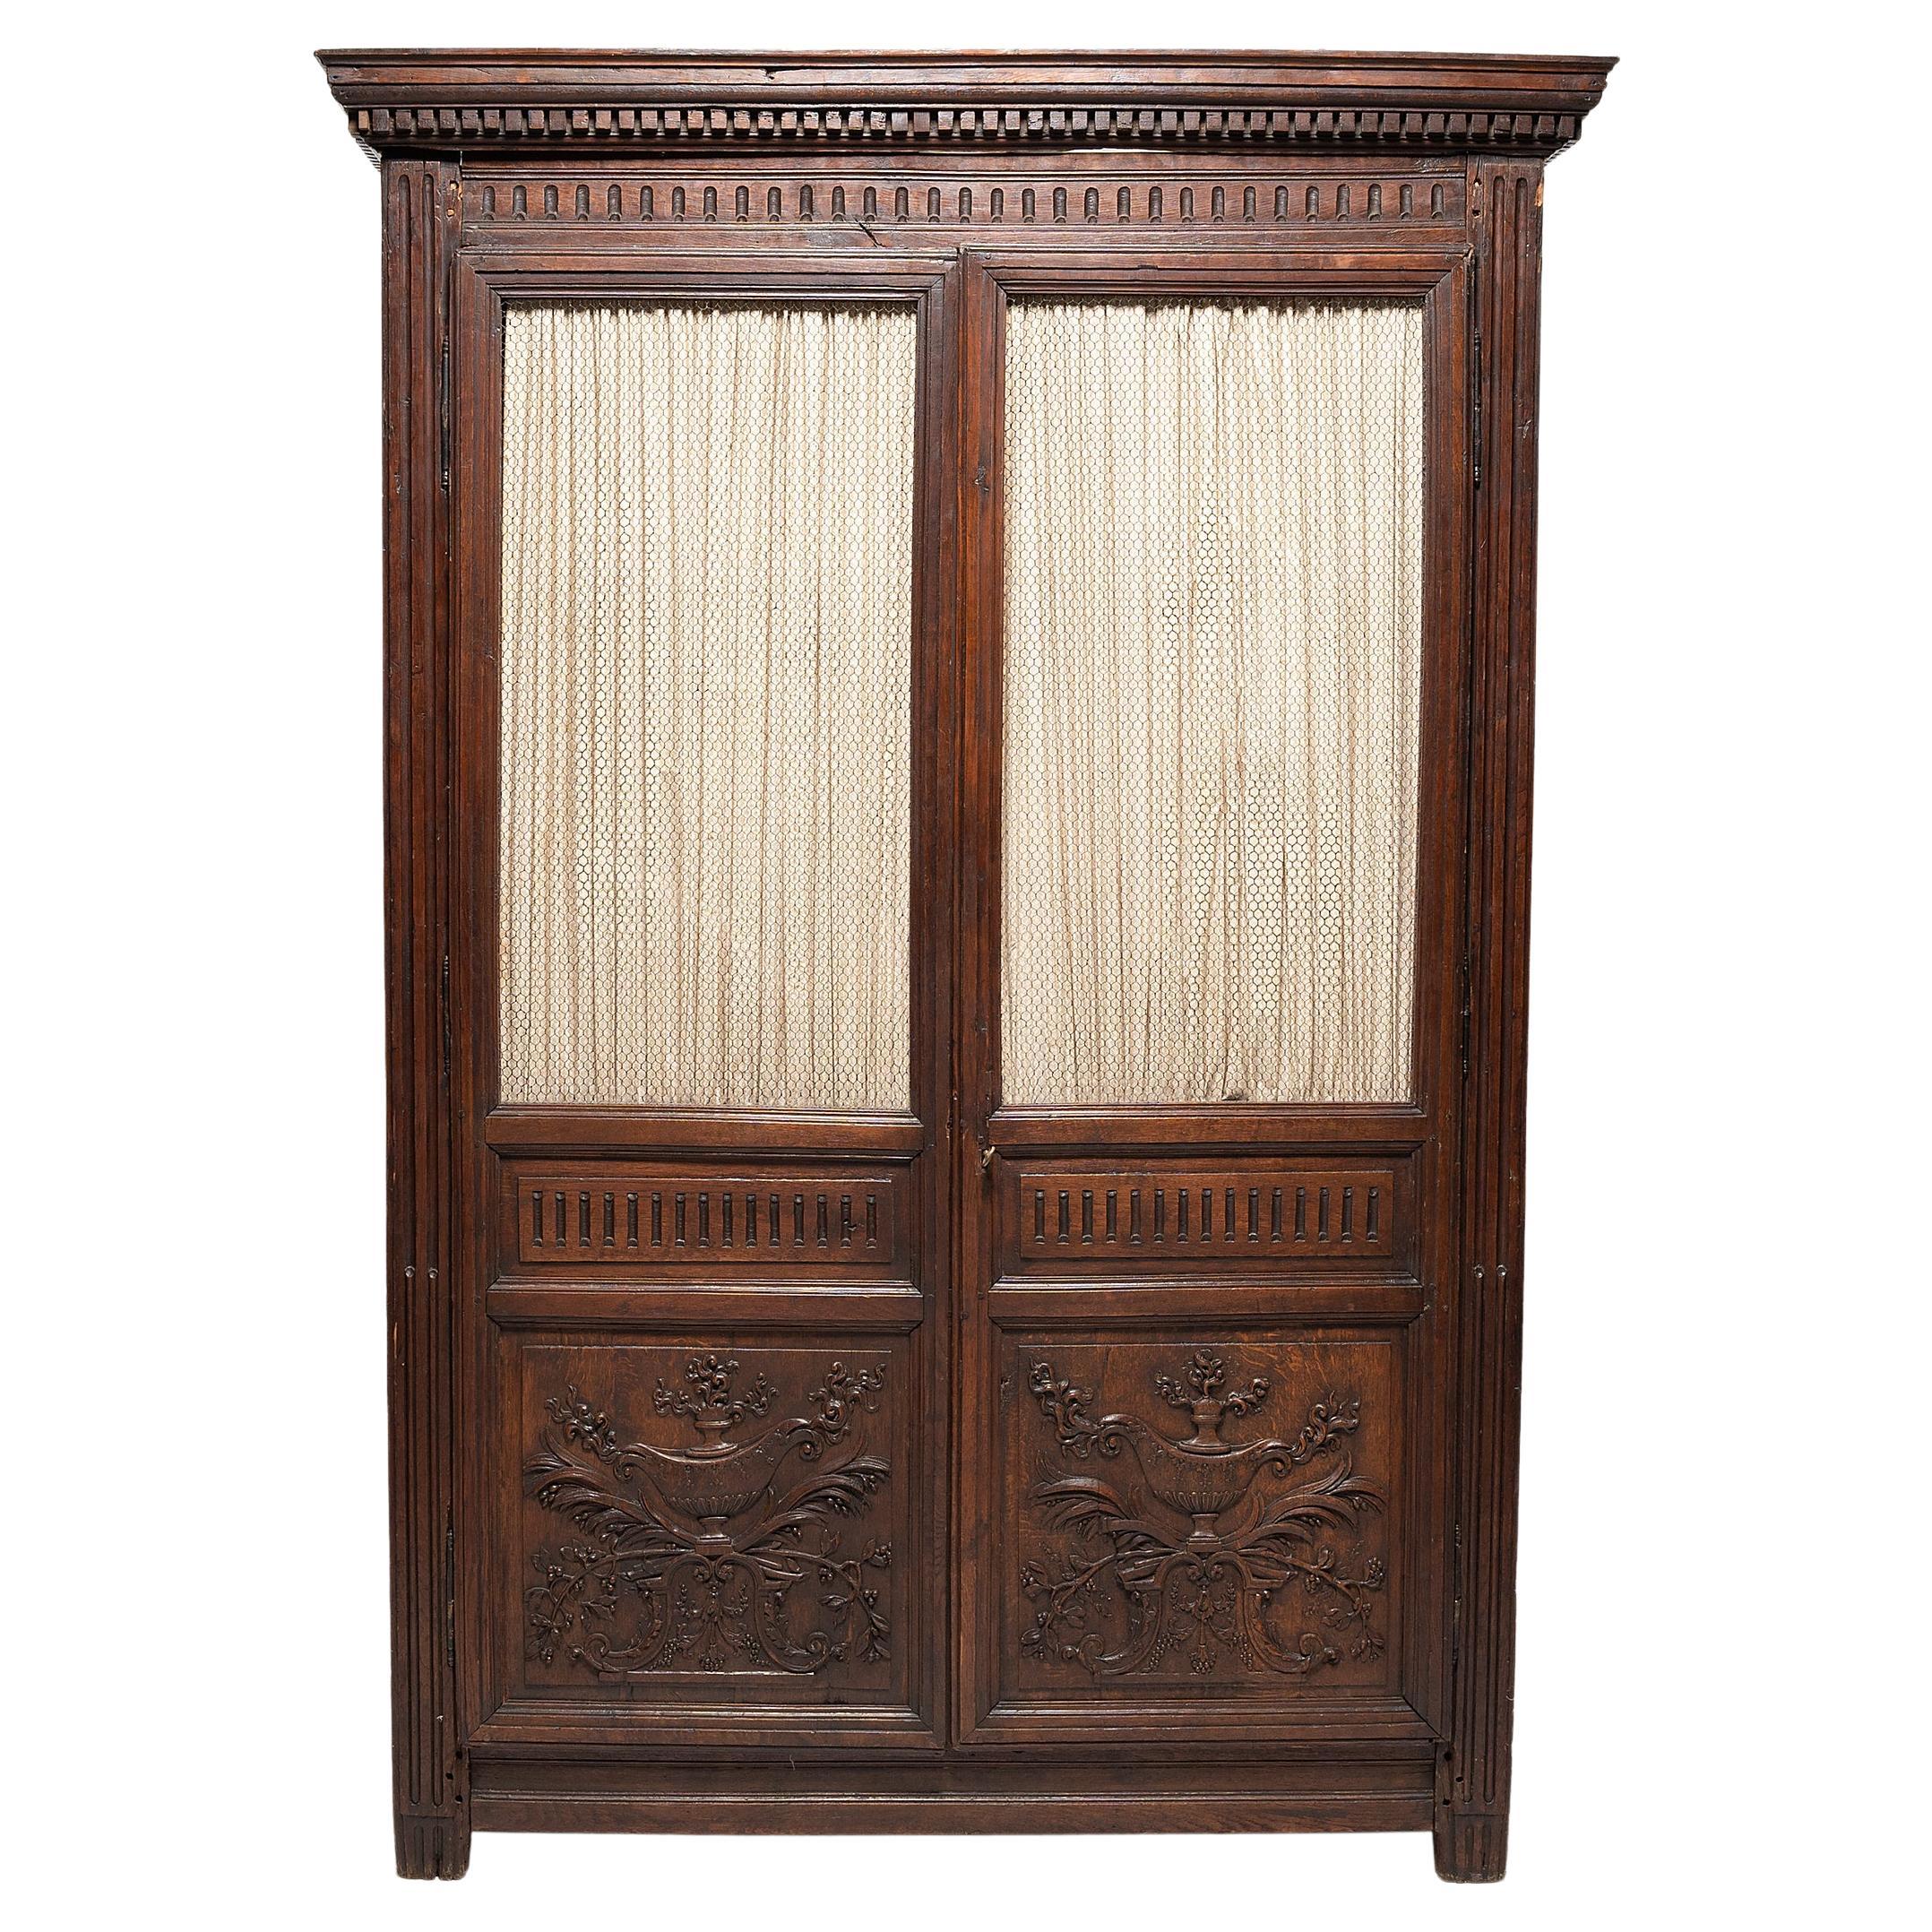 Grand Renaissance Revival Armoire with Wire Screens, circa 1800 For Sale